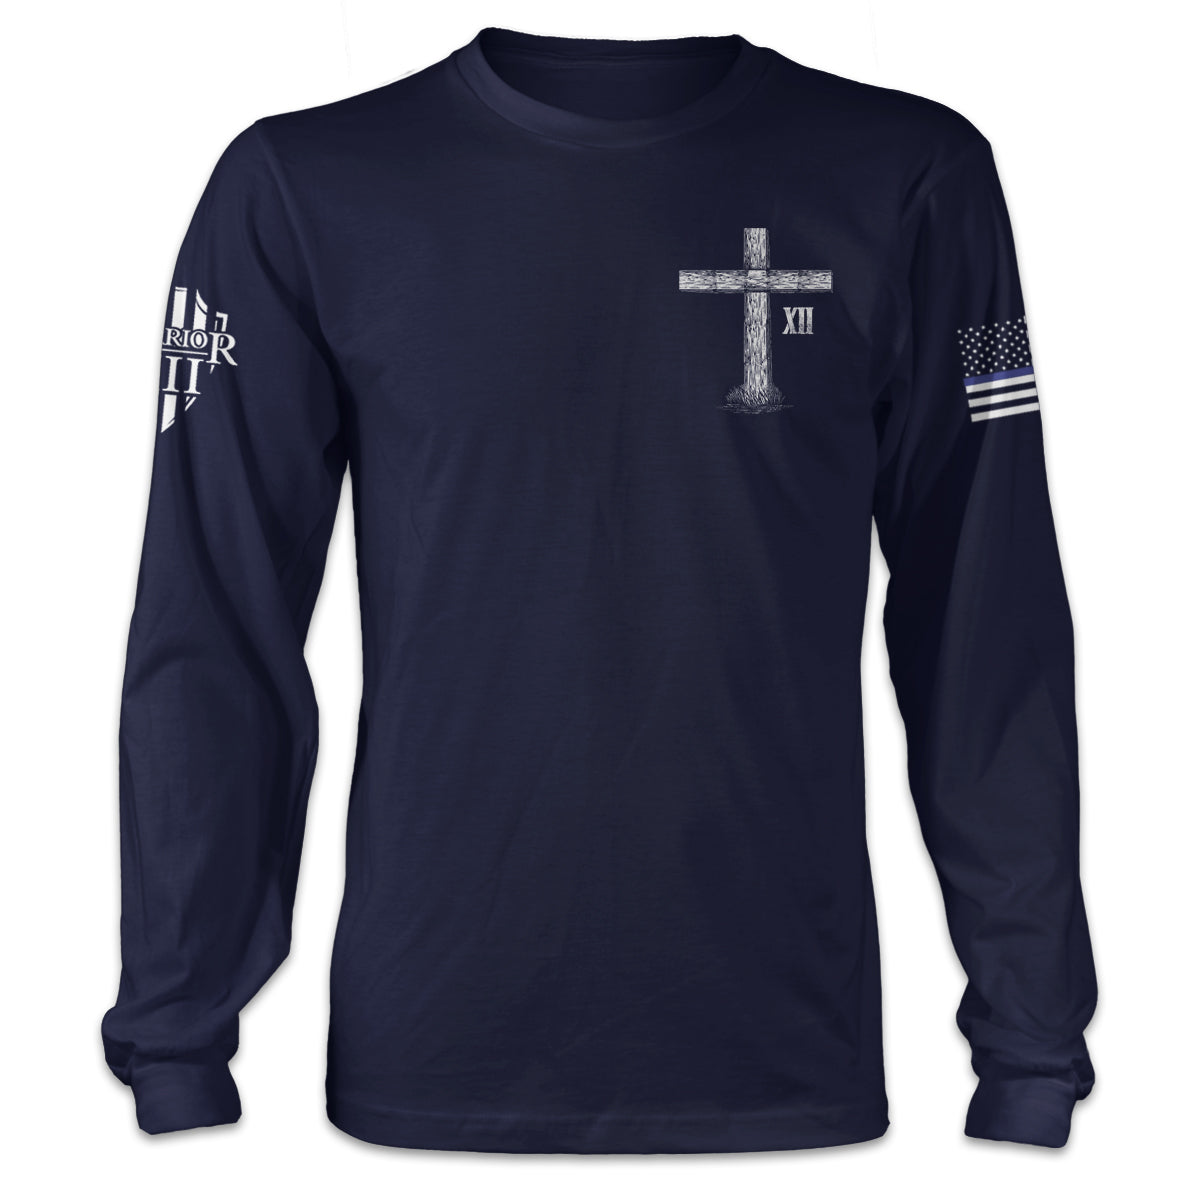 Navy blue Blessed Are The Peacemakers long sleeve shirt with a cross printed on the front of the shirt.eacemakers Long Sleeve